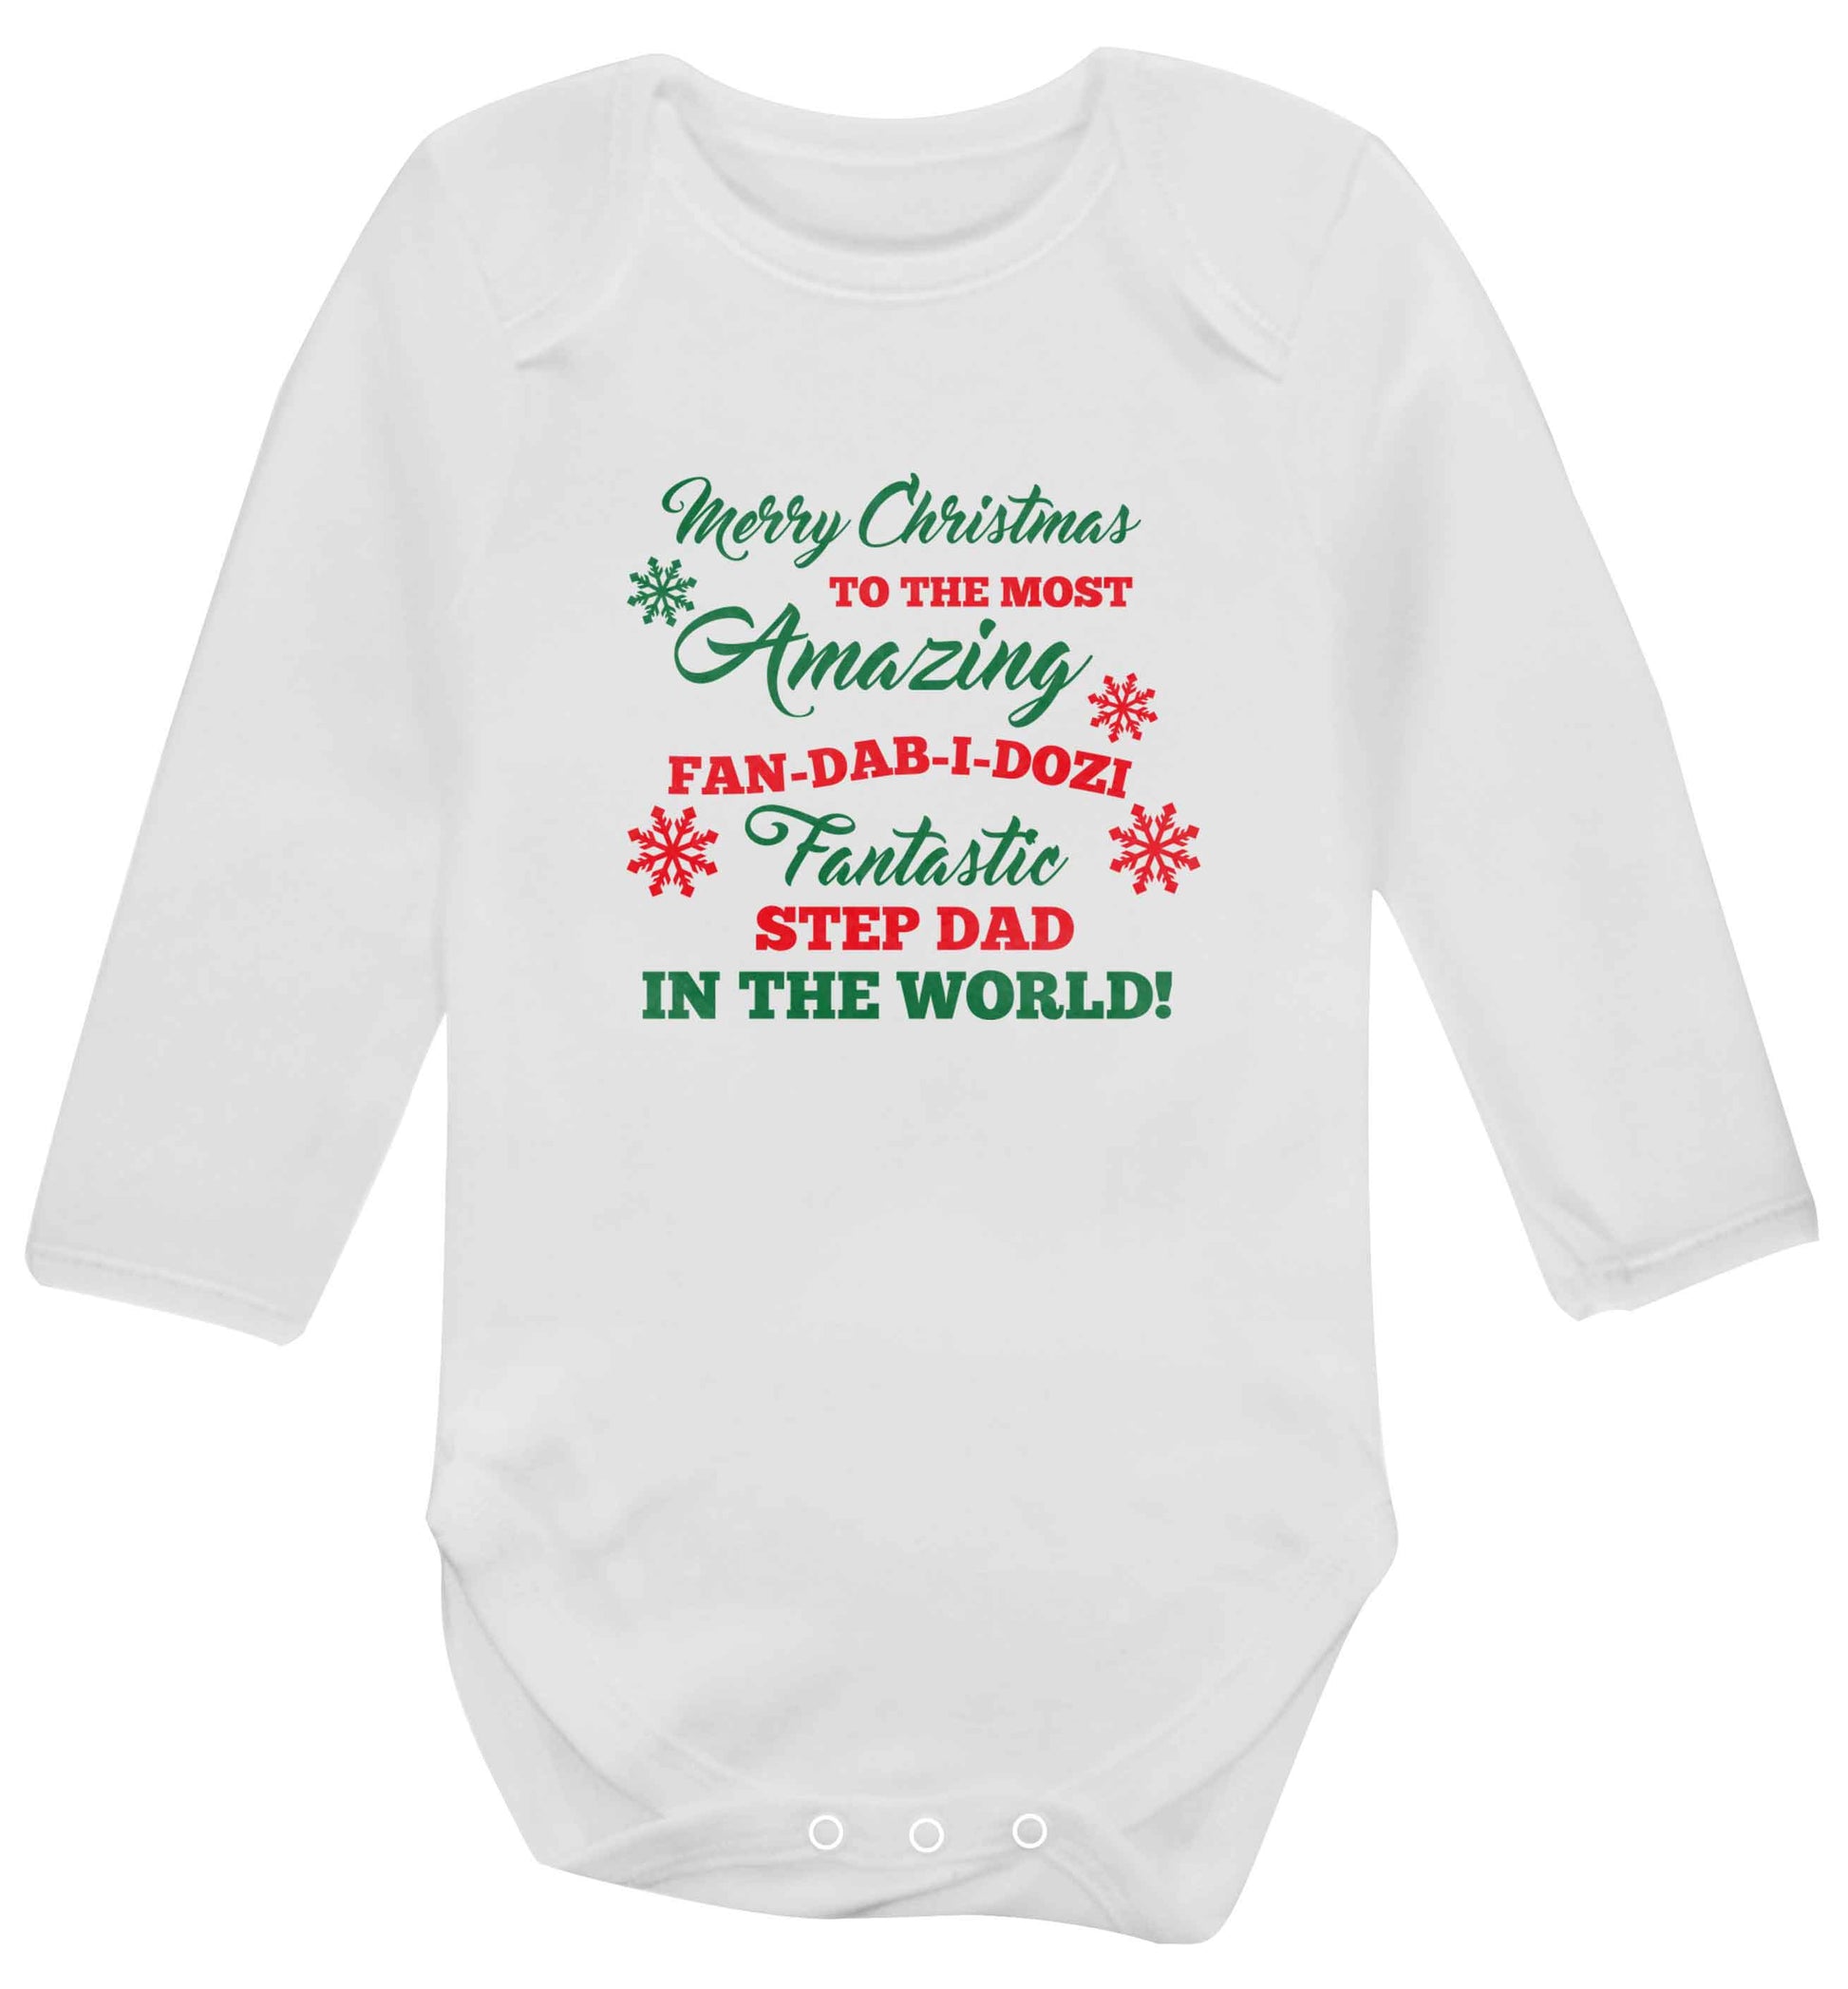 Merry Christmas to the most amazing fan-dab-i-dozi fantasic Step Dad in the world baby vest long sleeved white 6-12 months